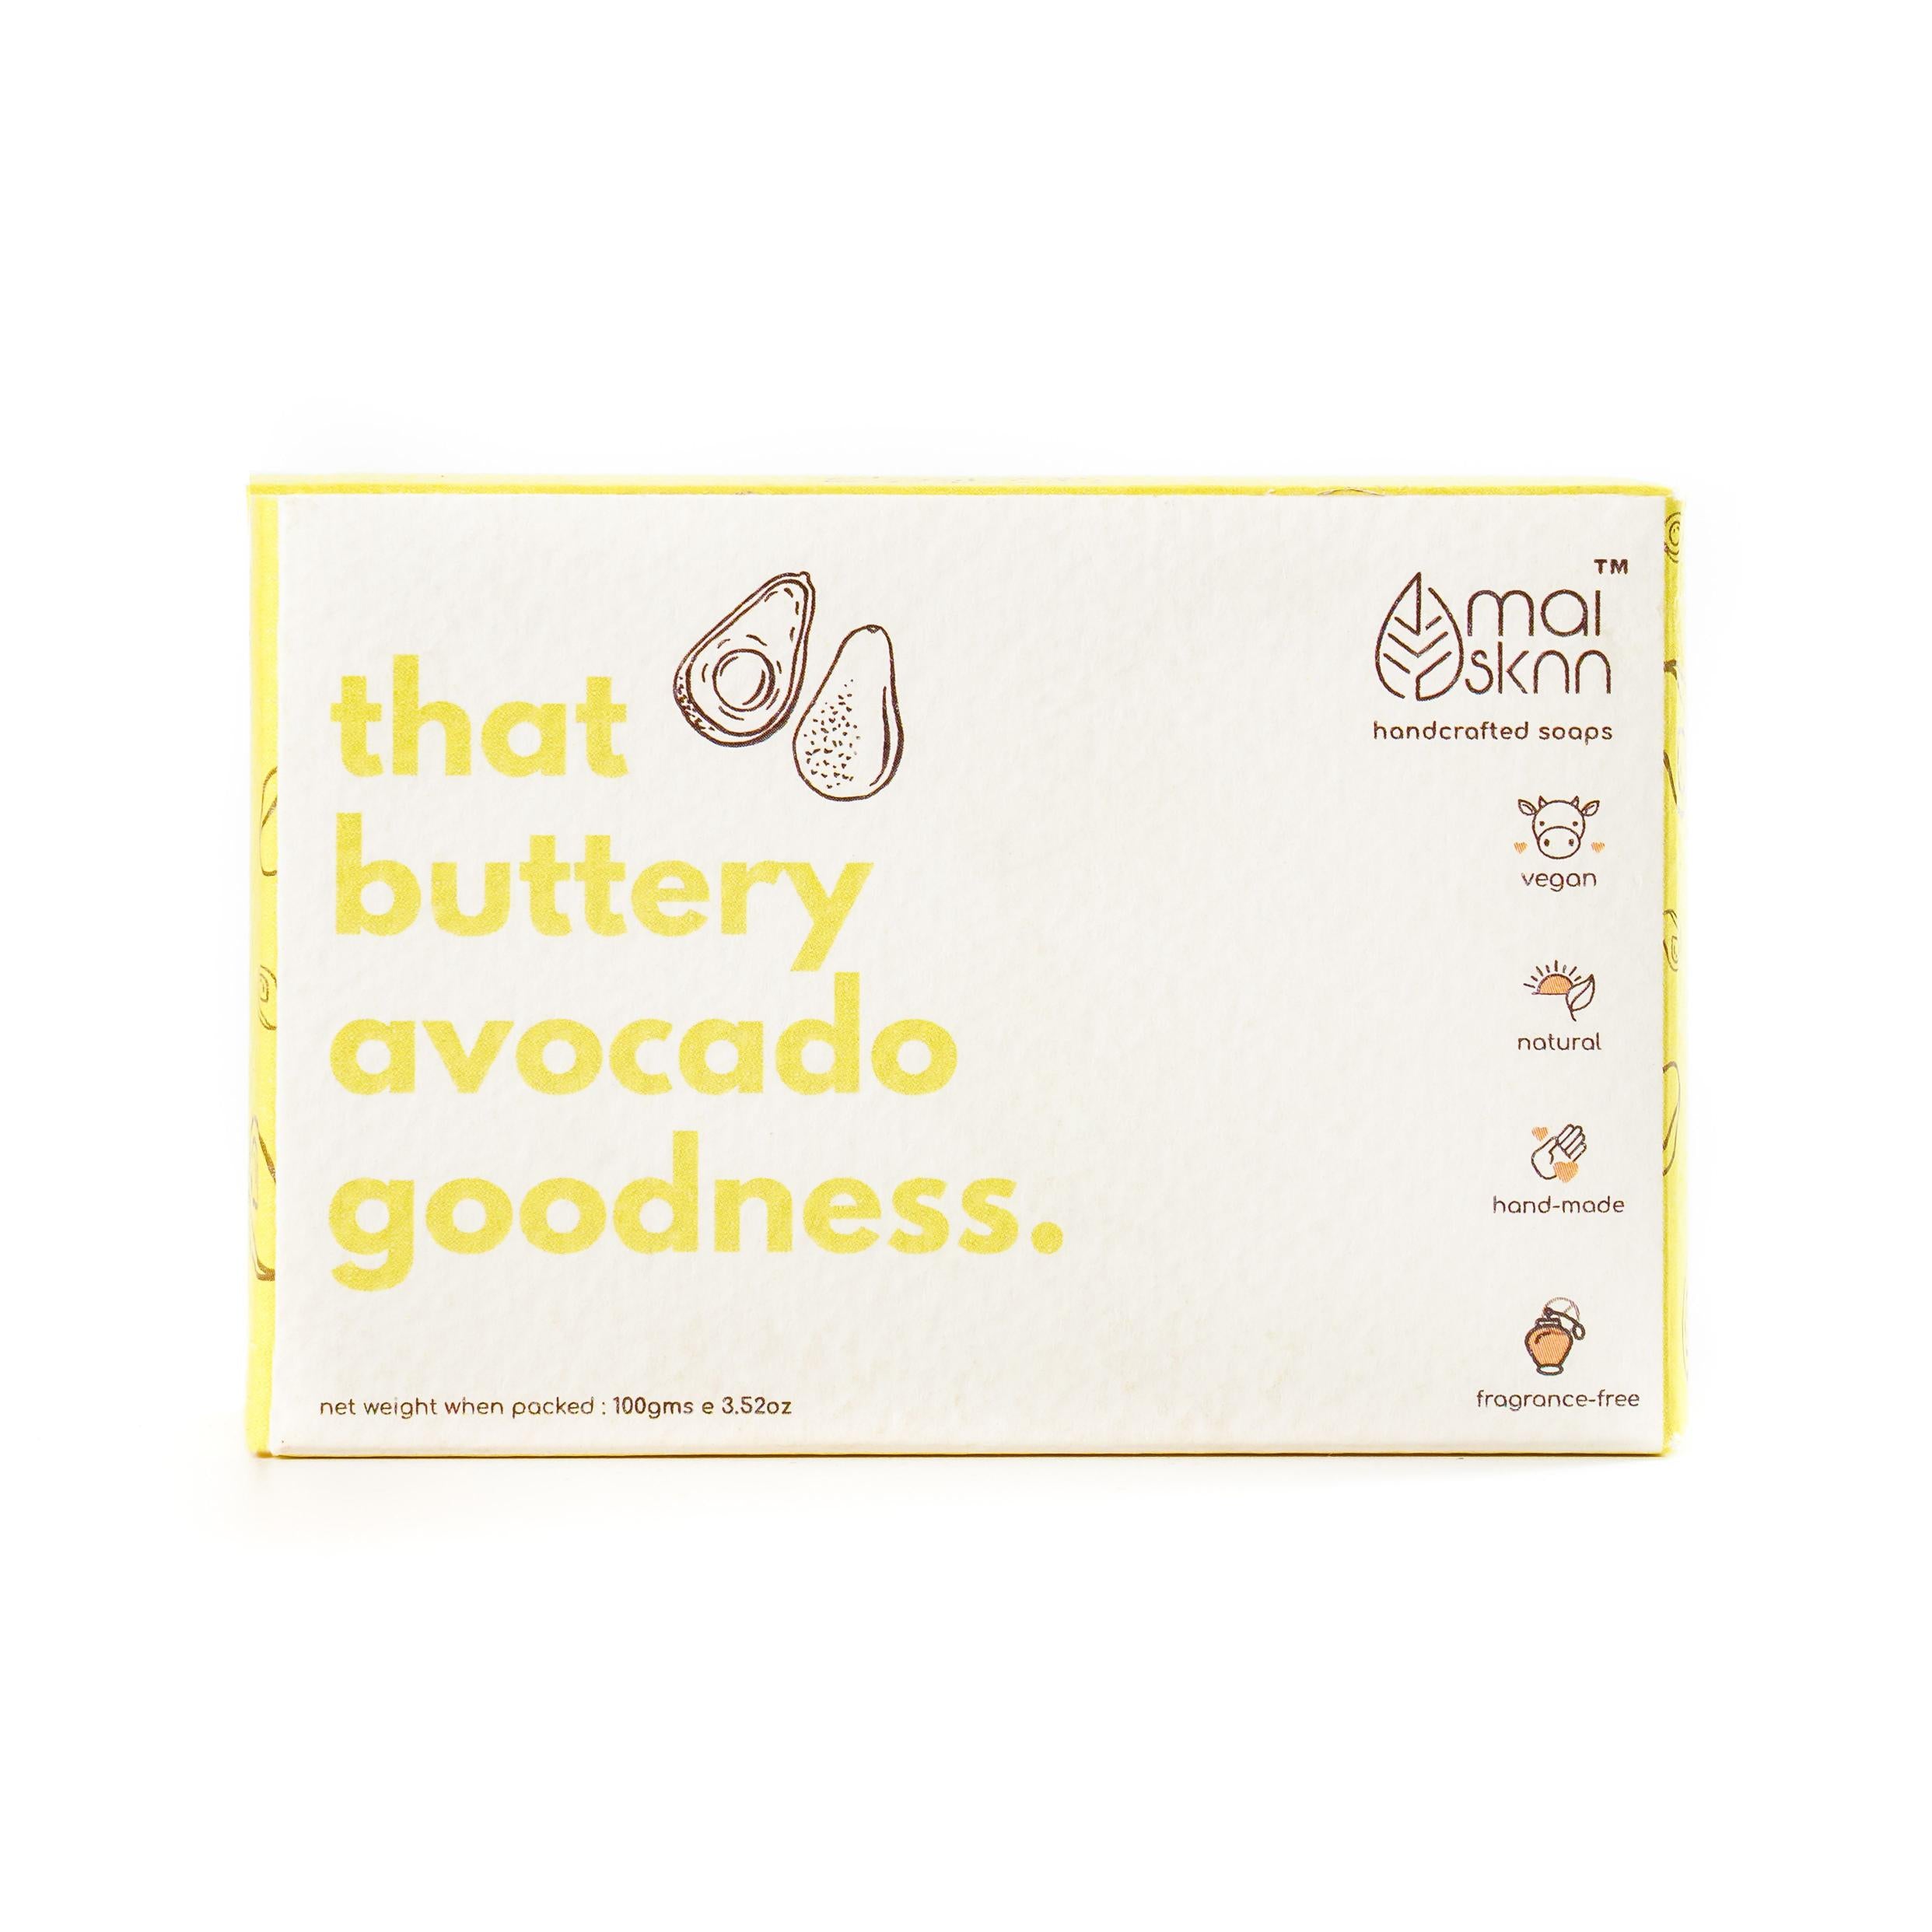 That Buttery Avocado Goodness Soap Bar